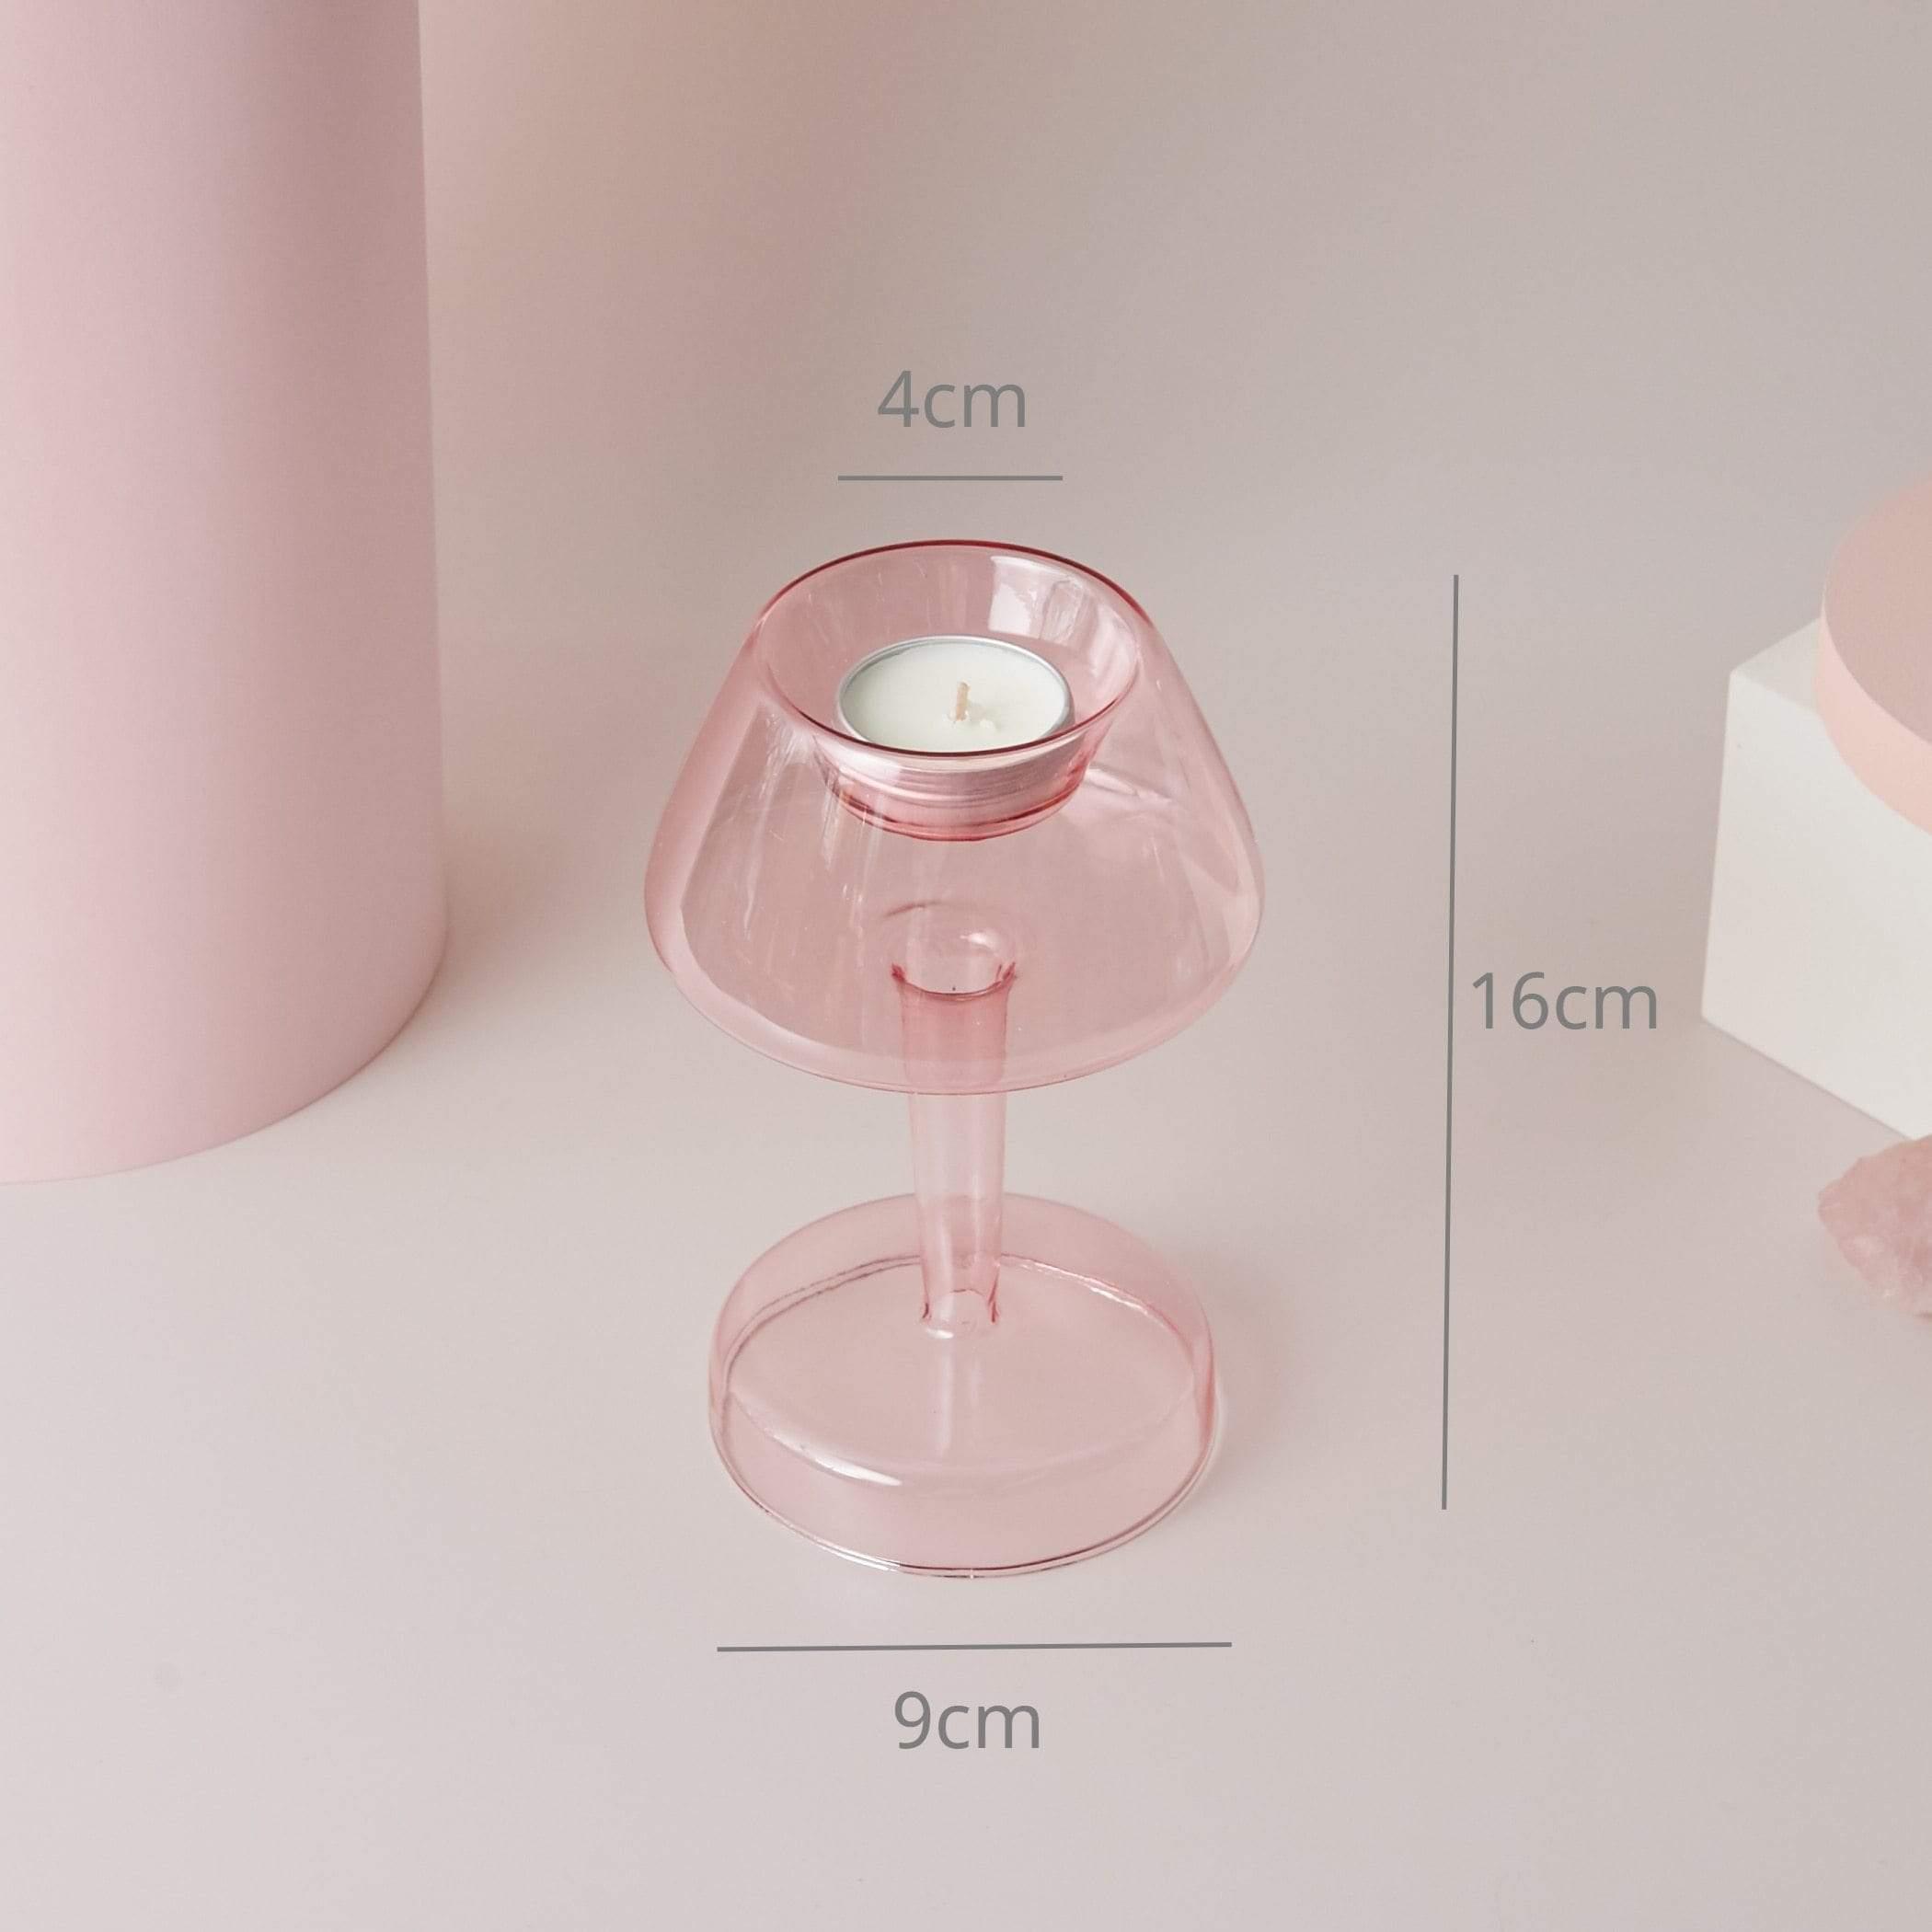 Shop 0 Pink lamp Pink Glass Candle Holder Taper Candlesticks Holder Wedding Table Centerpieces Nordic Home Decoration Mademoiselle Home Decor